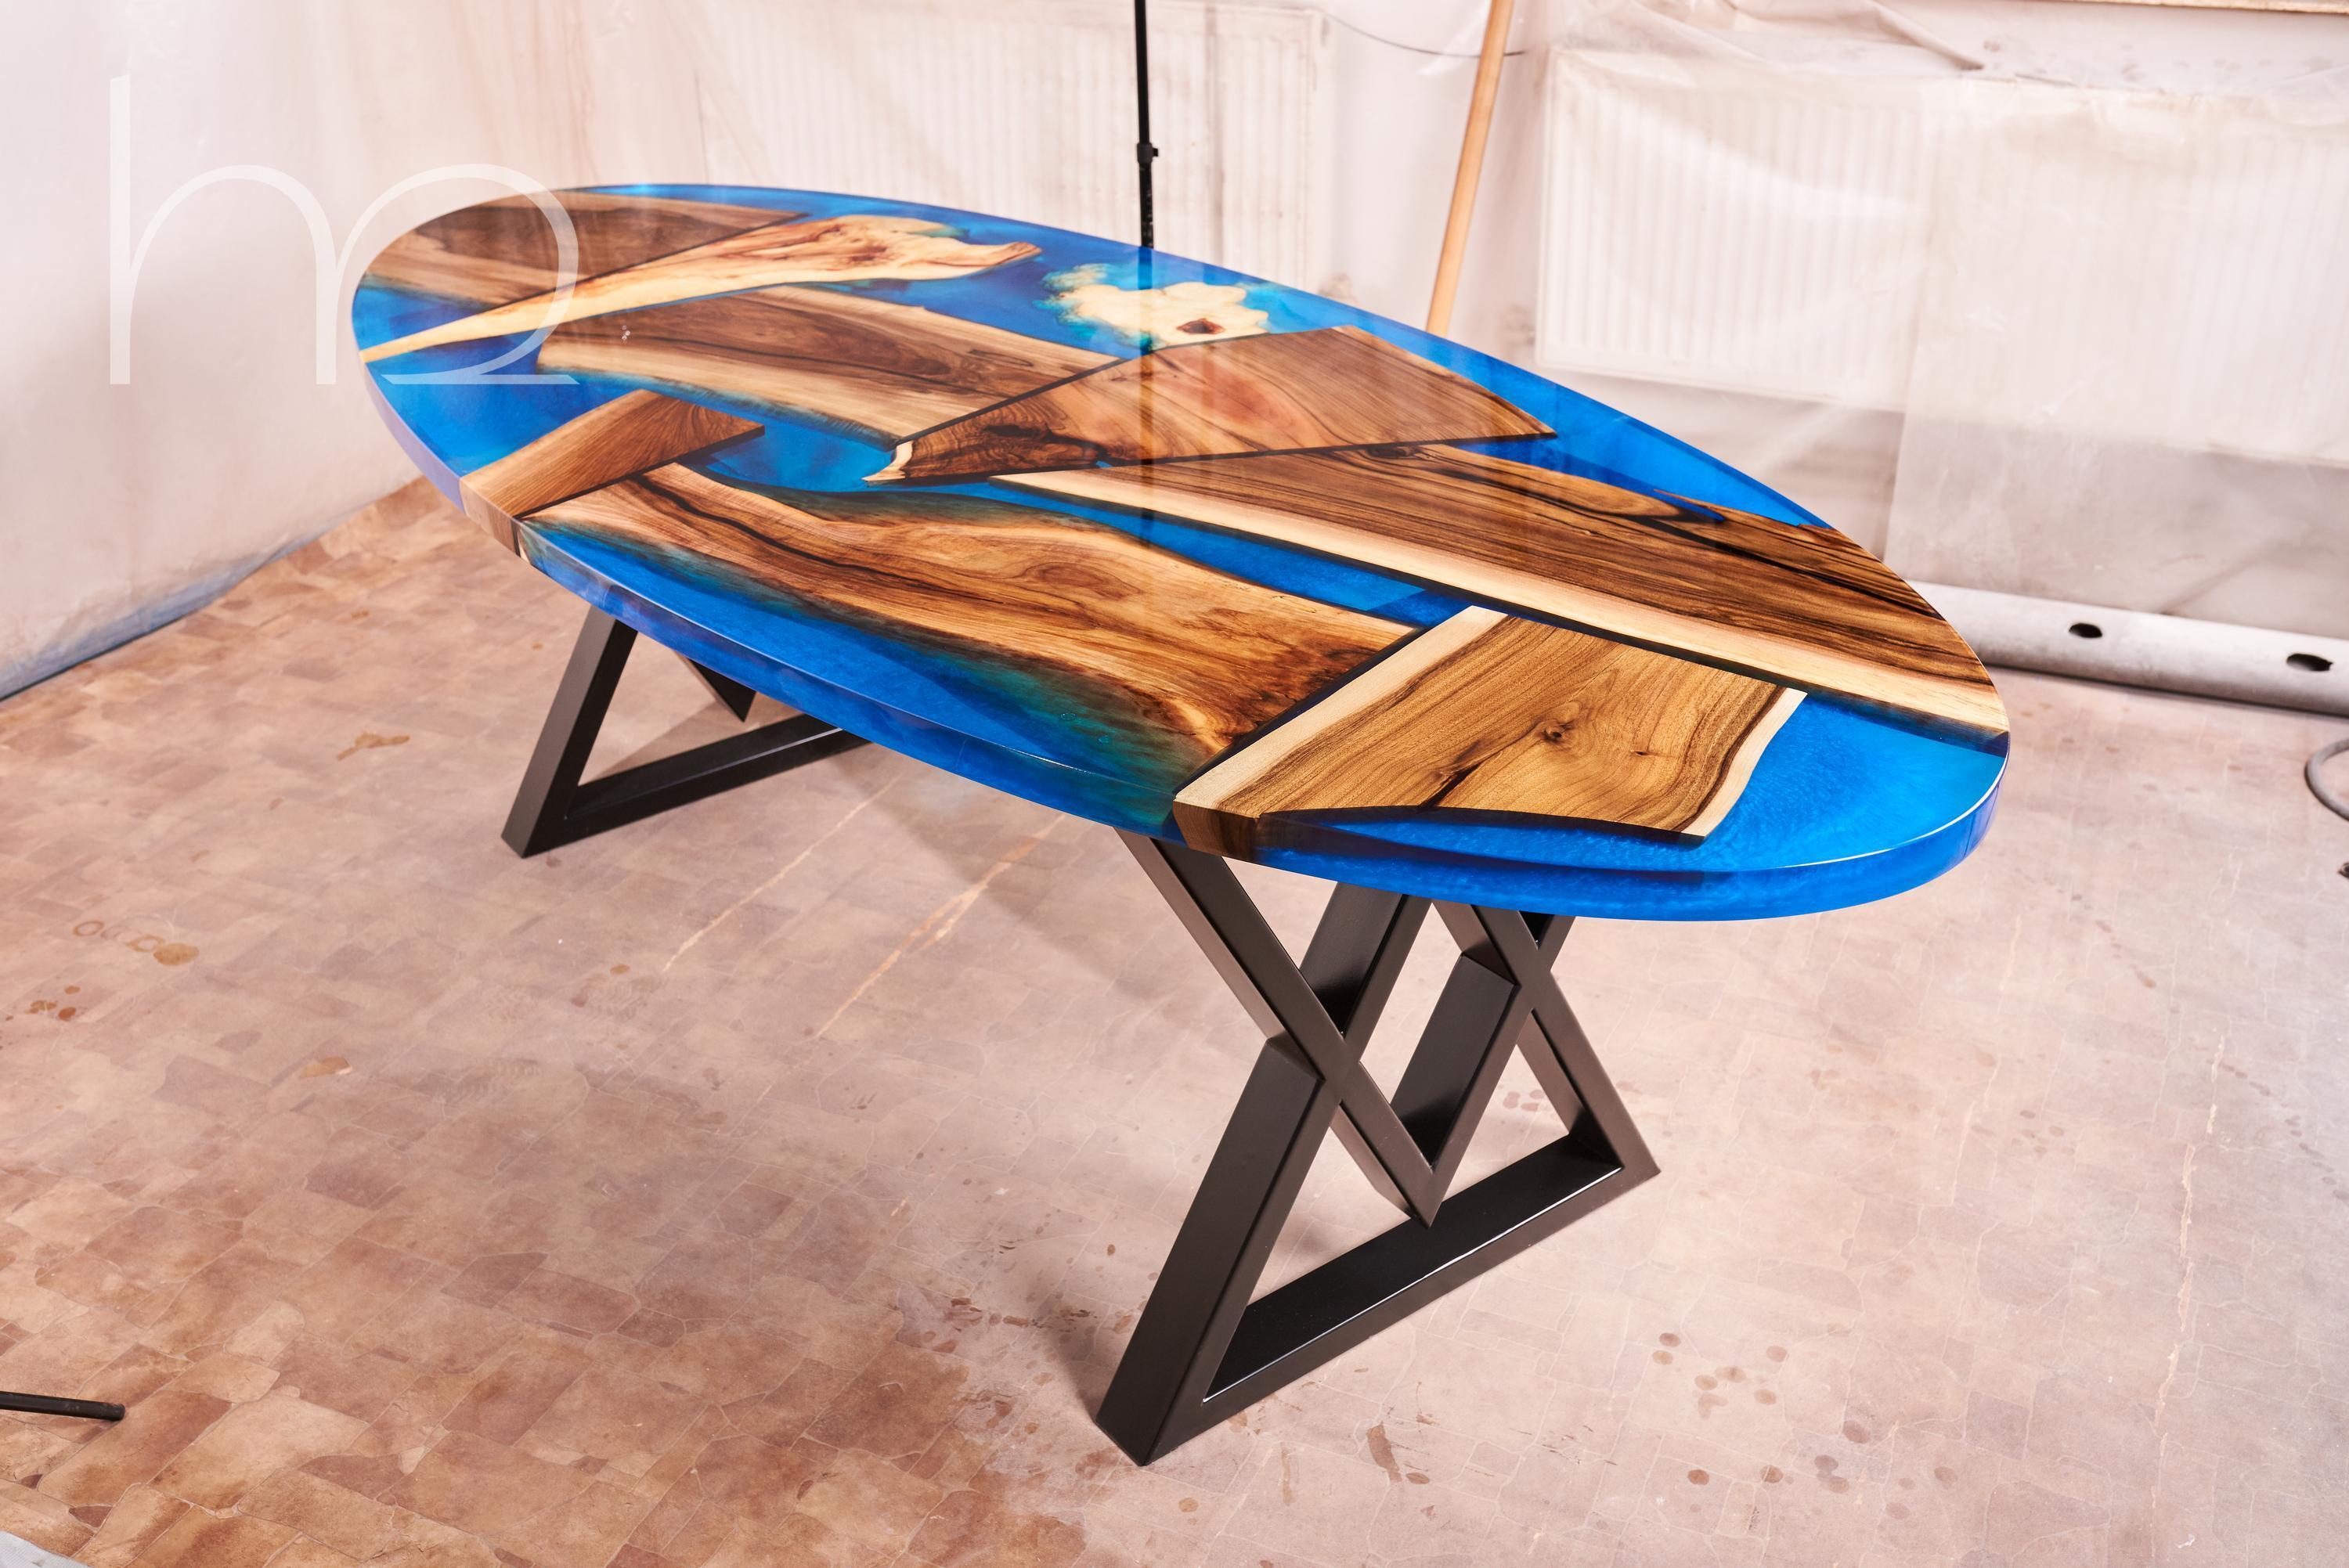 Arts and Crafts Oval Dining Table Modern Contemporary Dining Table Resin Wood Handmade Tables For Sale